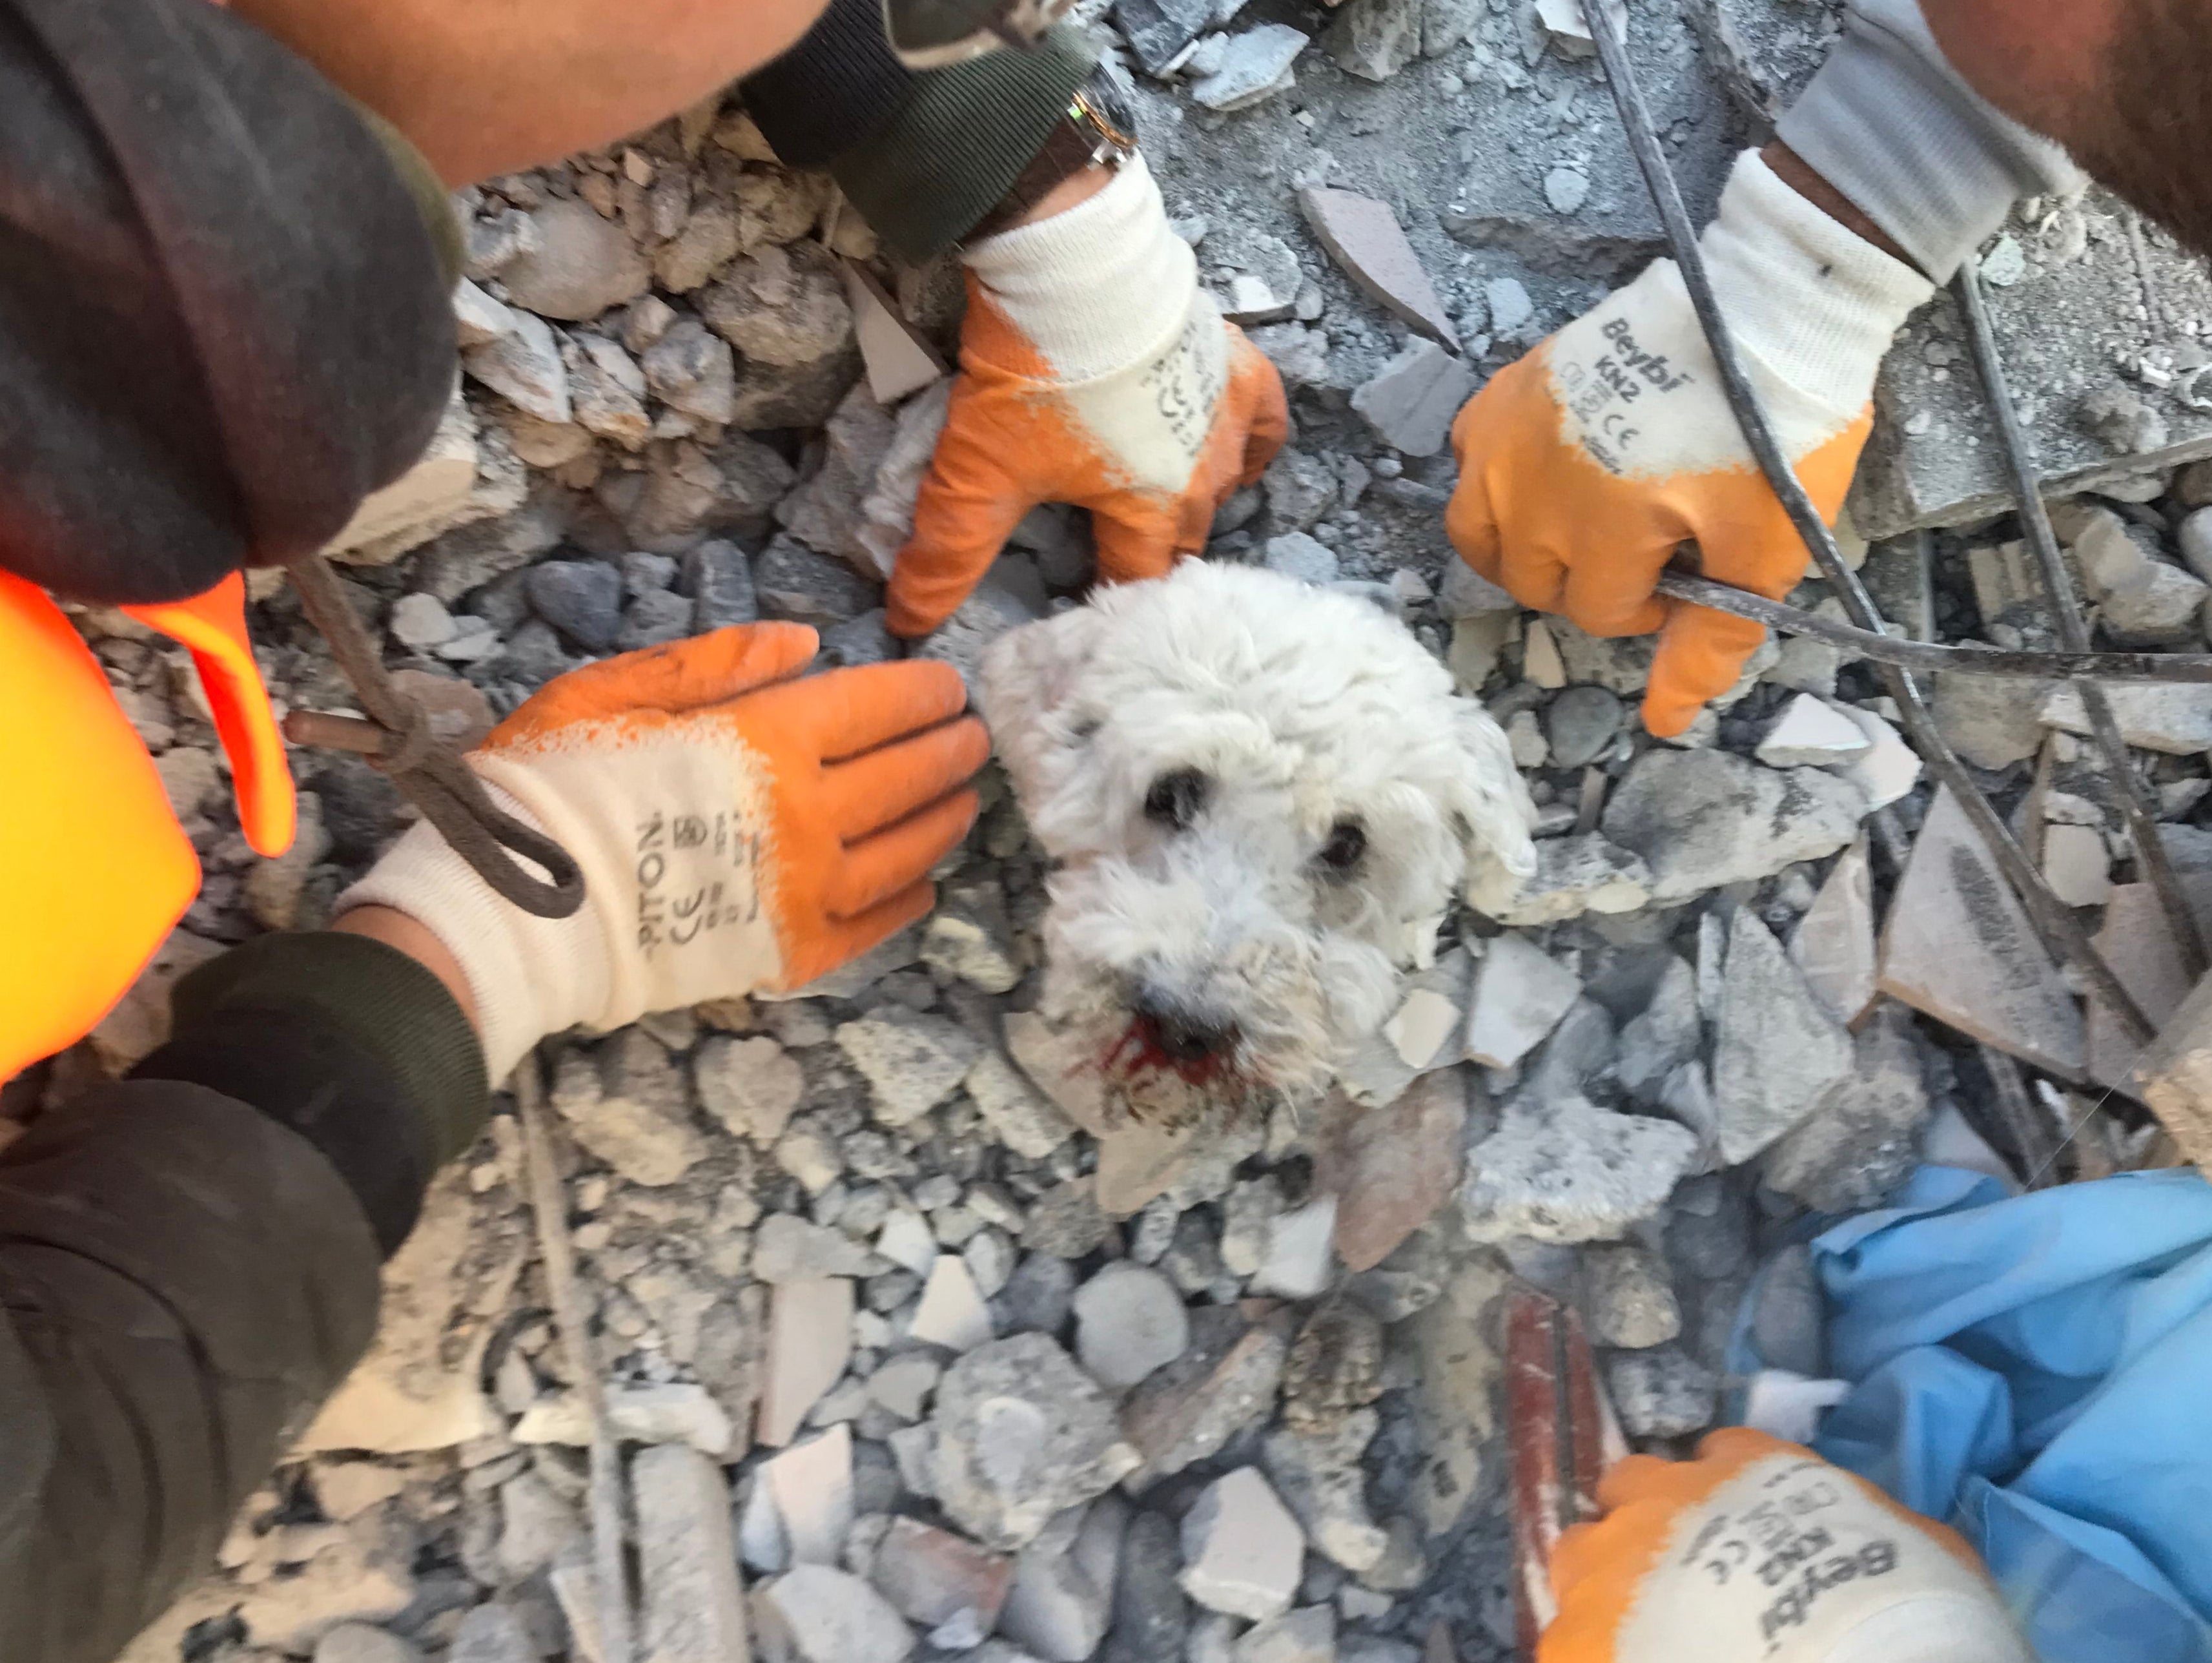 Rescuers pulled the dog from the debris